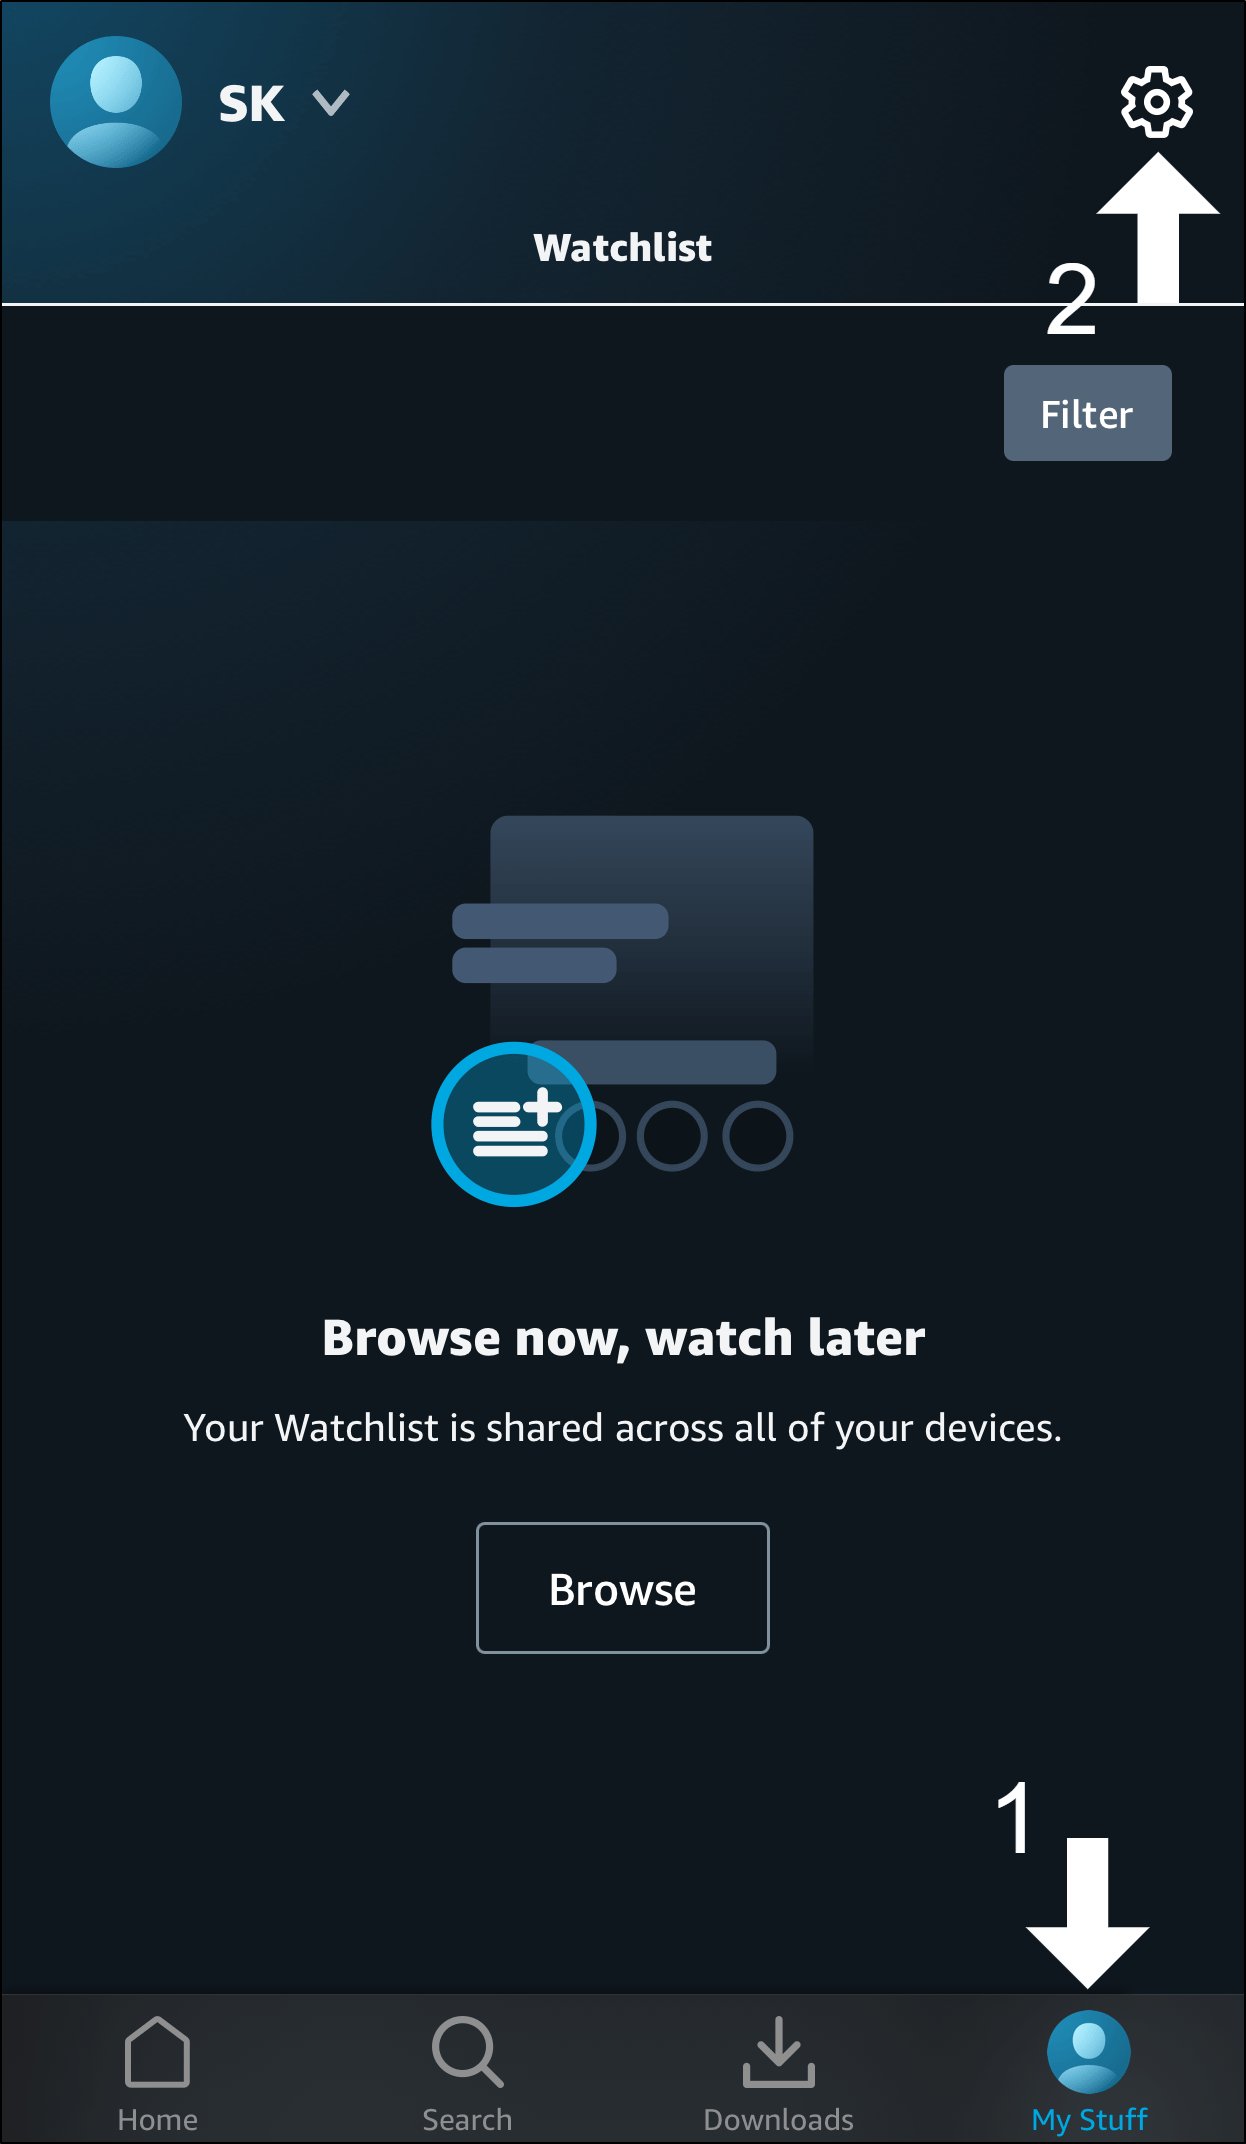 contact Amazon prime video help through app to fix subtitles not working